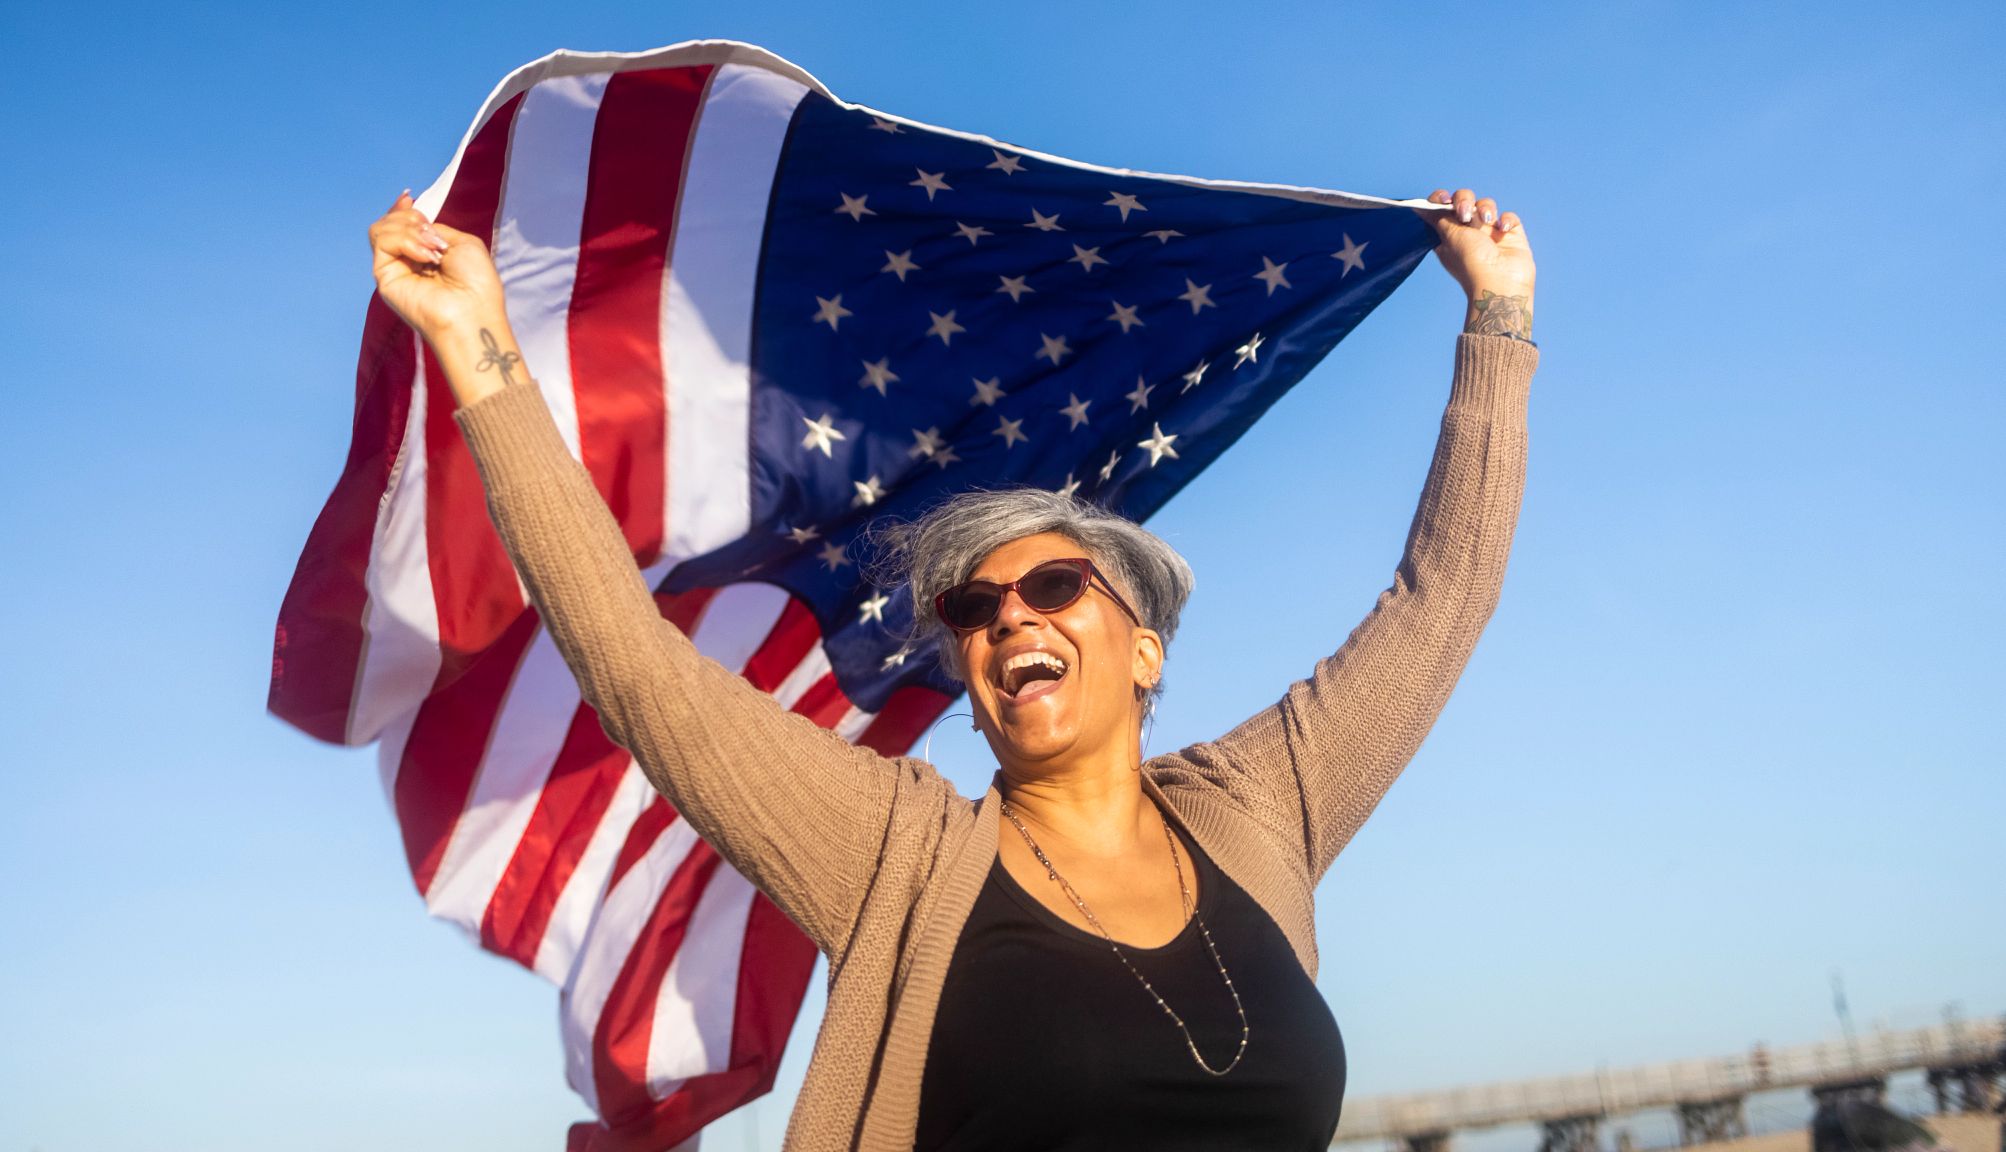 woman smiling holding an American flag 